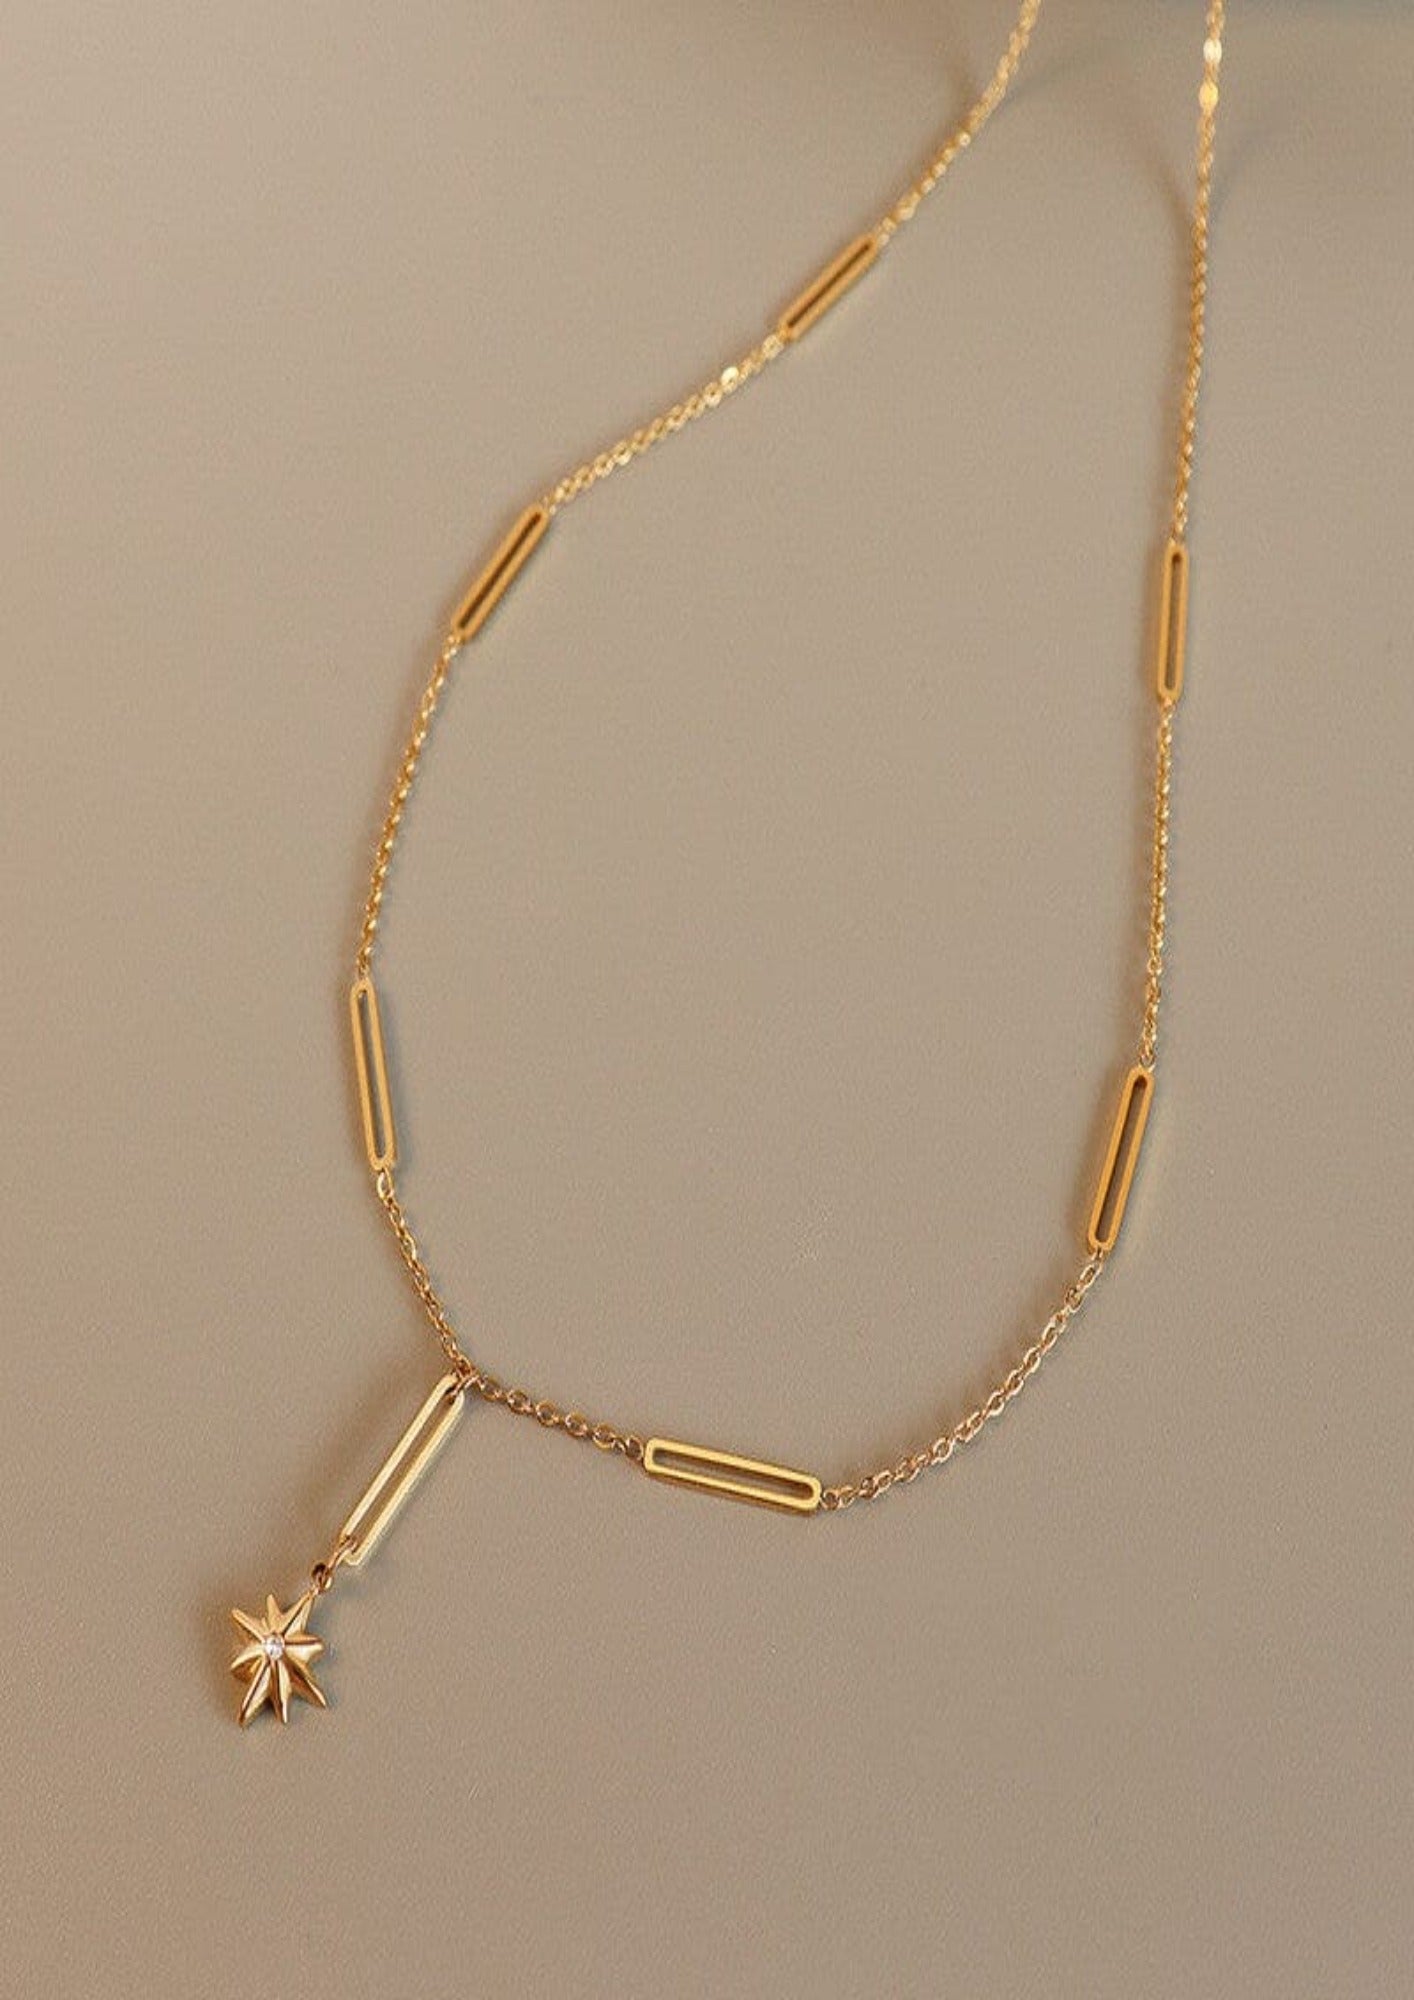 NORTH STAR NECKLACE neck Yubama Jewelry Online Store - The Elegant Designs of Gold and Silver ! 